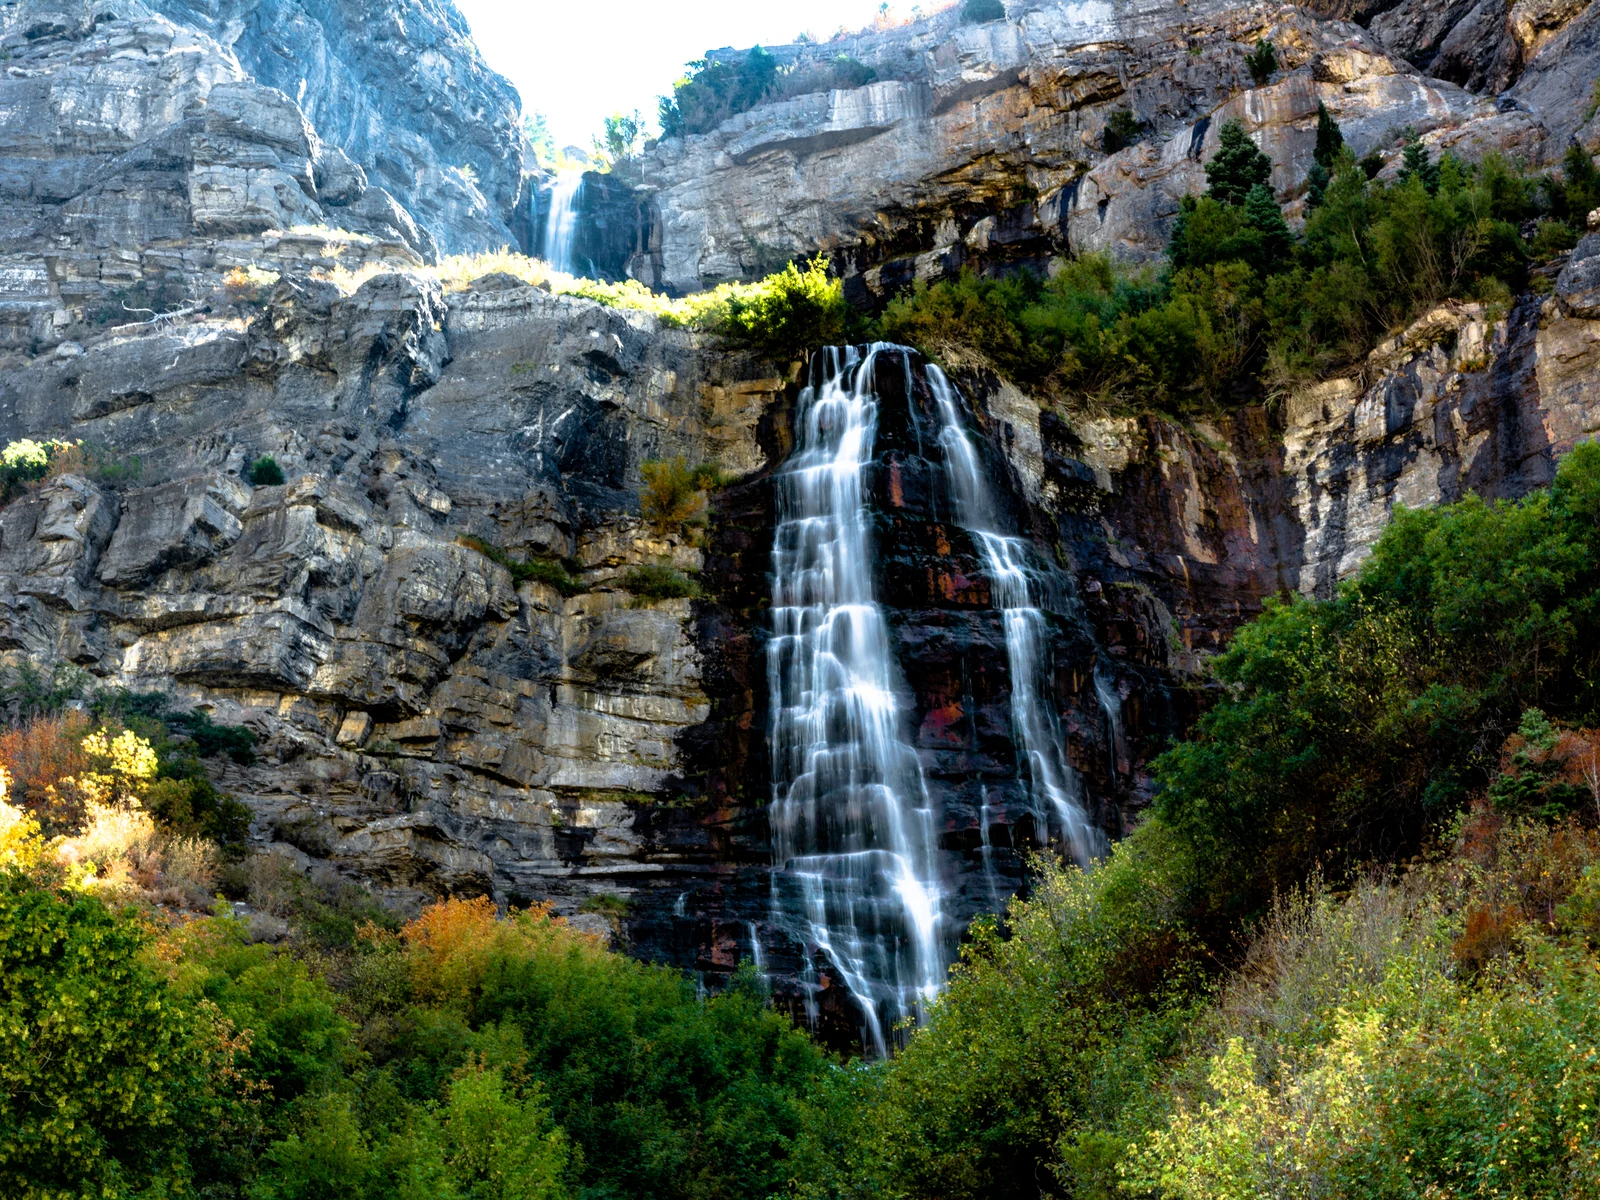 Bridal Veil Falls, Utah, USA. 607-foot-tall double cataract waterfall in the south end of Provo Canyon pictured during the best time to visit Utah